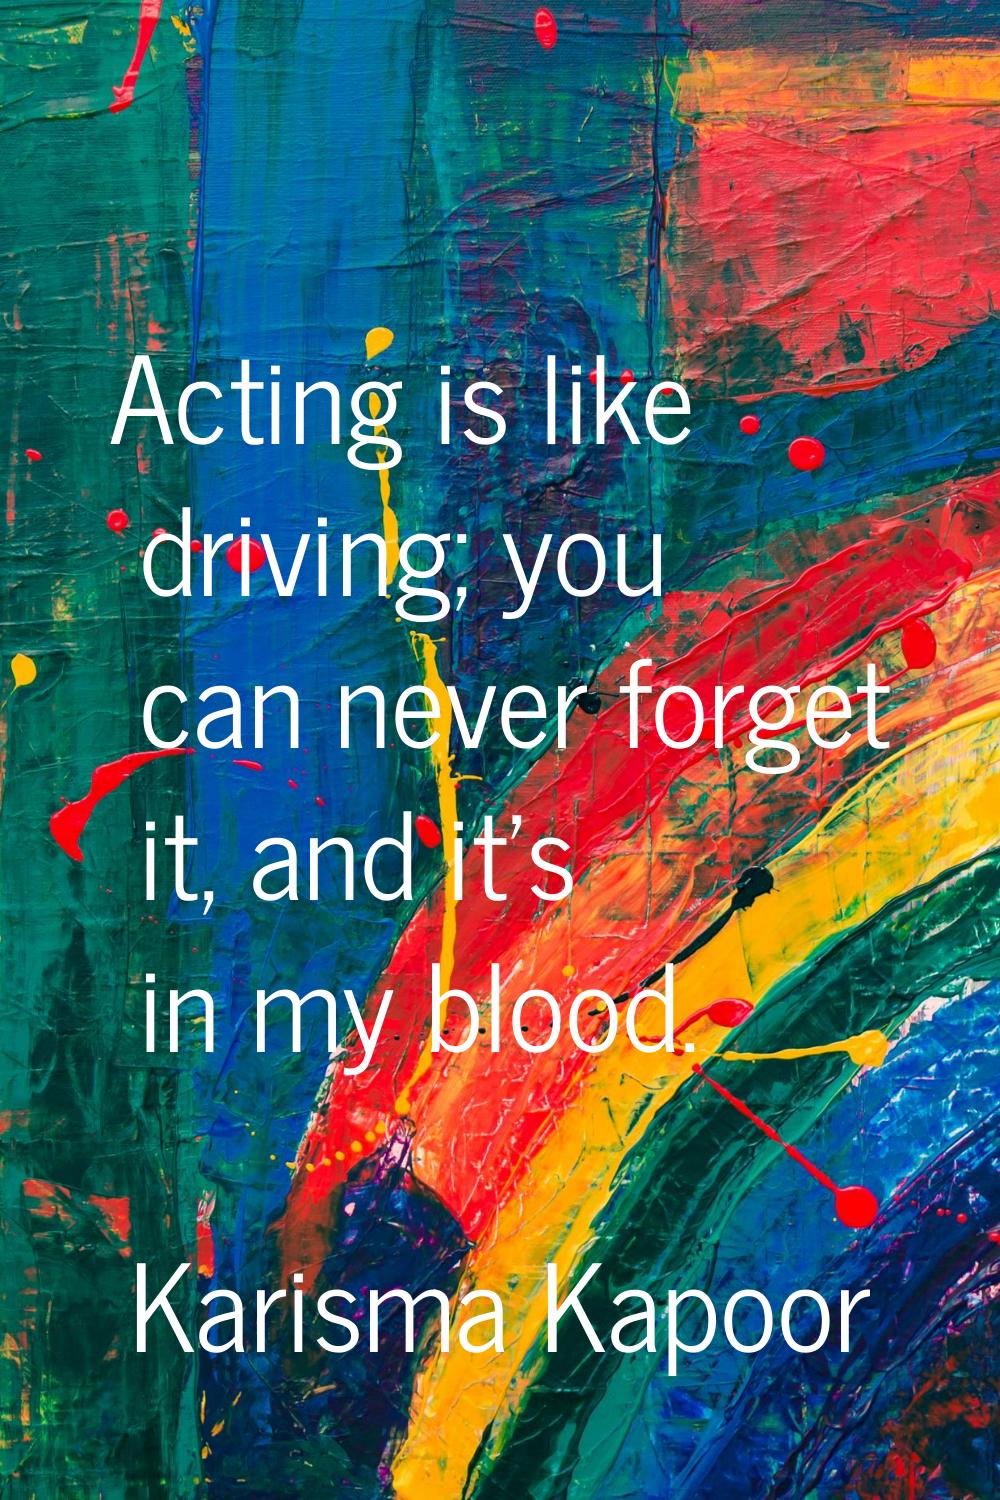 Acting is like driving; you can never forget it, and it's in my blood.